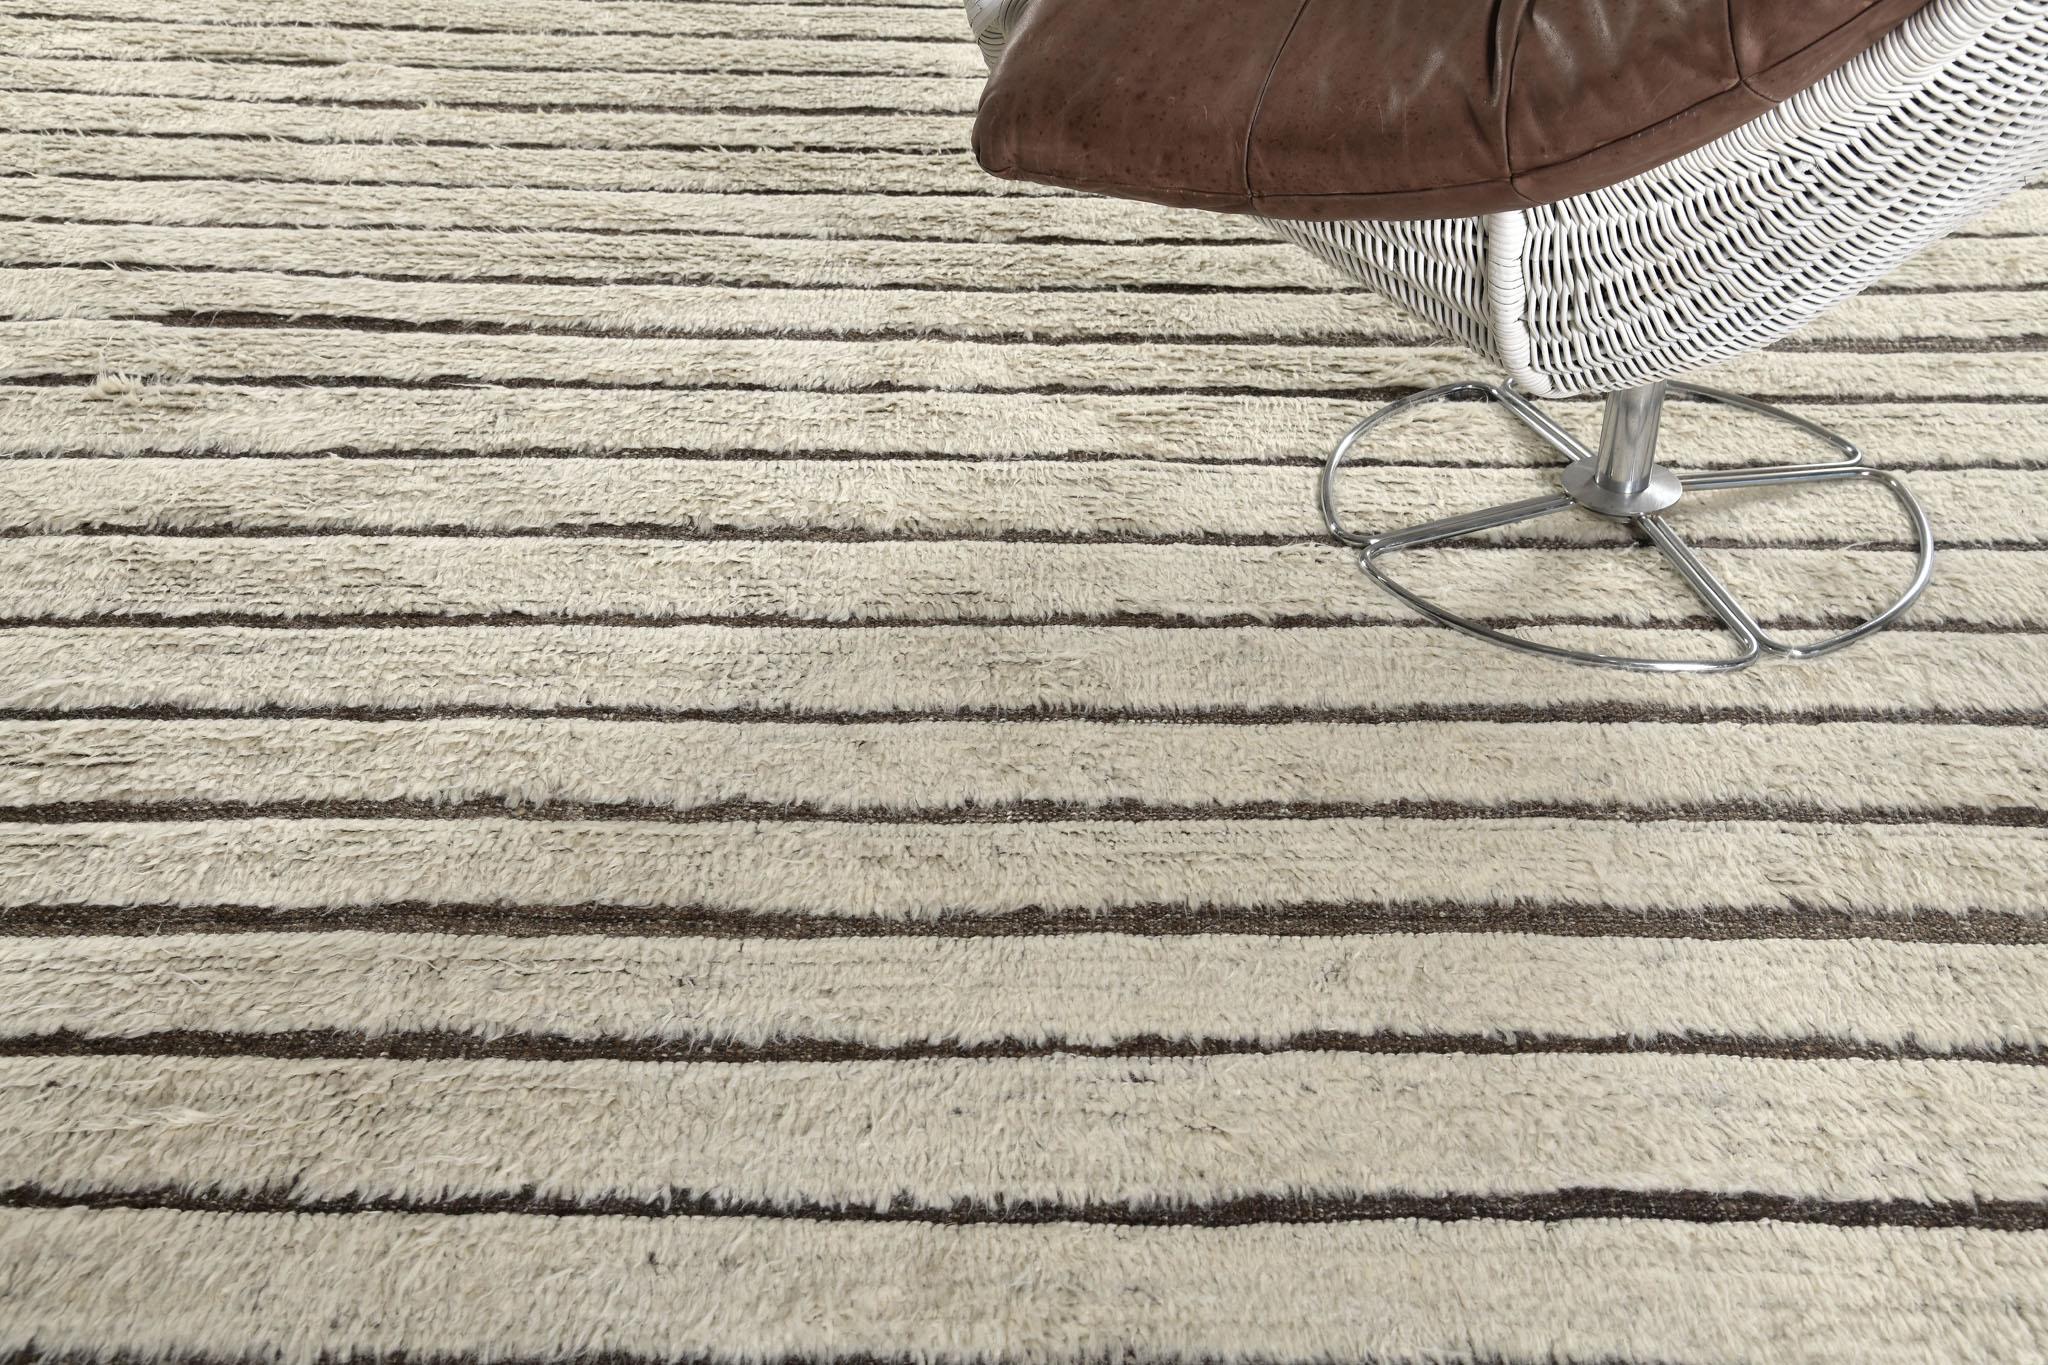 The shipca is a handwoven luxurious wool rug with timeless embossed horizontal strokes detailing. In addition to its neutral-toned flatweave, Shipca has a beautiful umber brown shag that brings a lustrous and exciting feel to one's space. The Haute